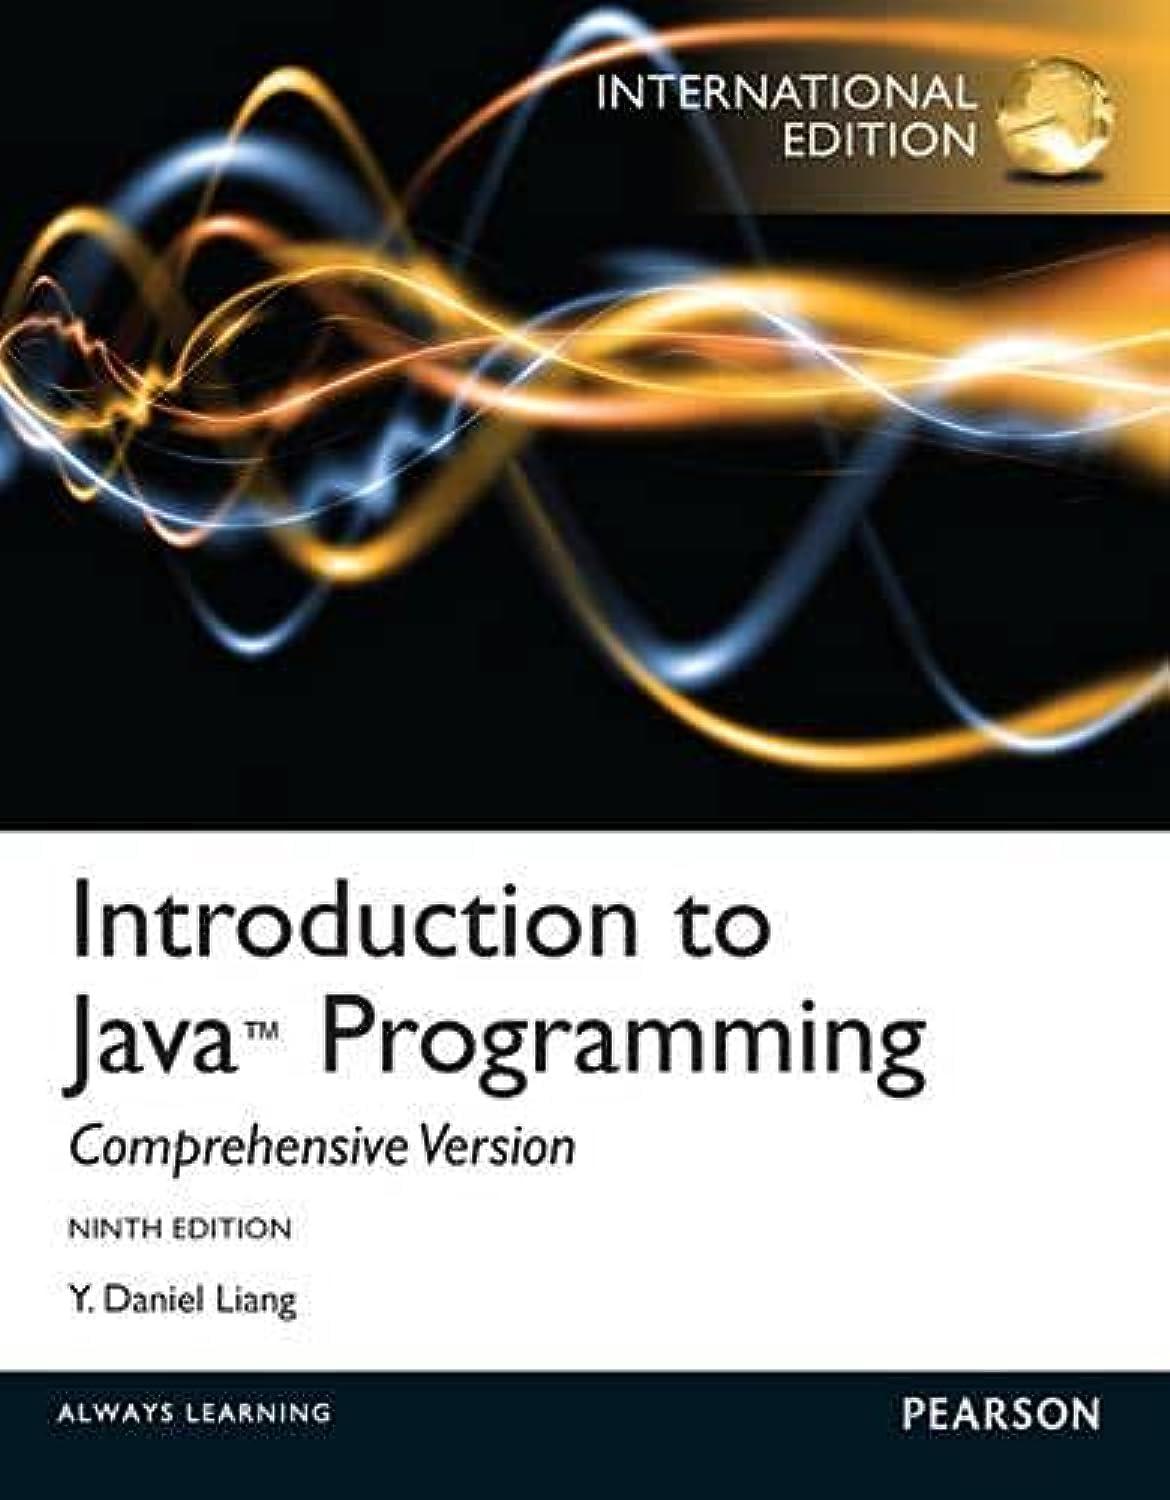 introduction to java programming 9th edition international edition y. daniel liang 0273771388, 978-0273771388